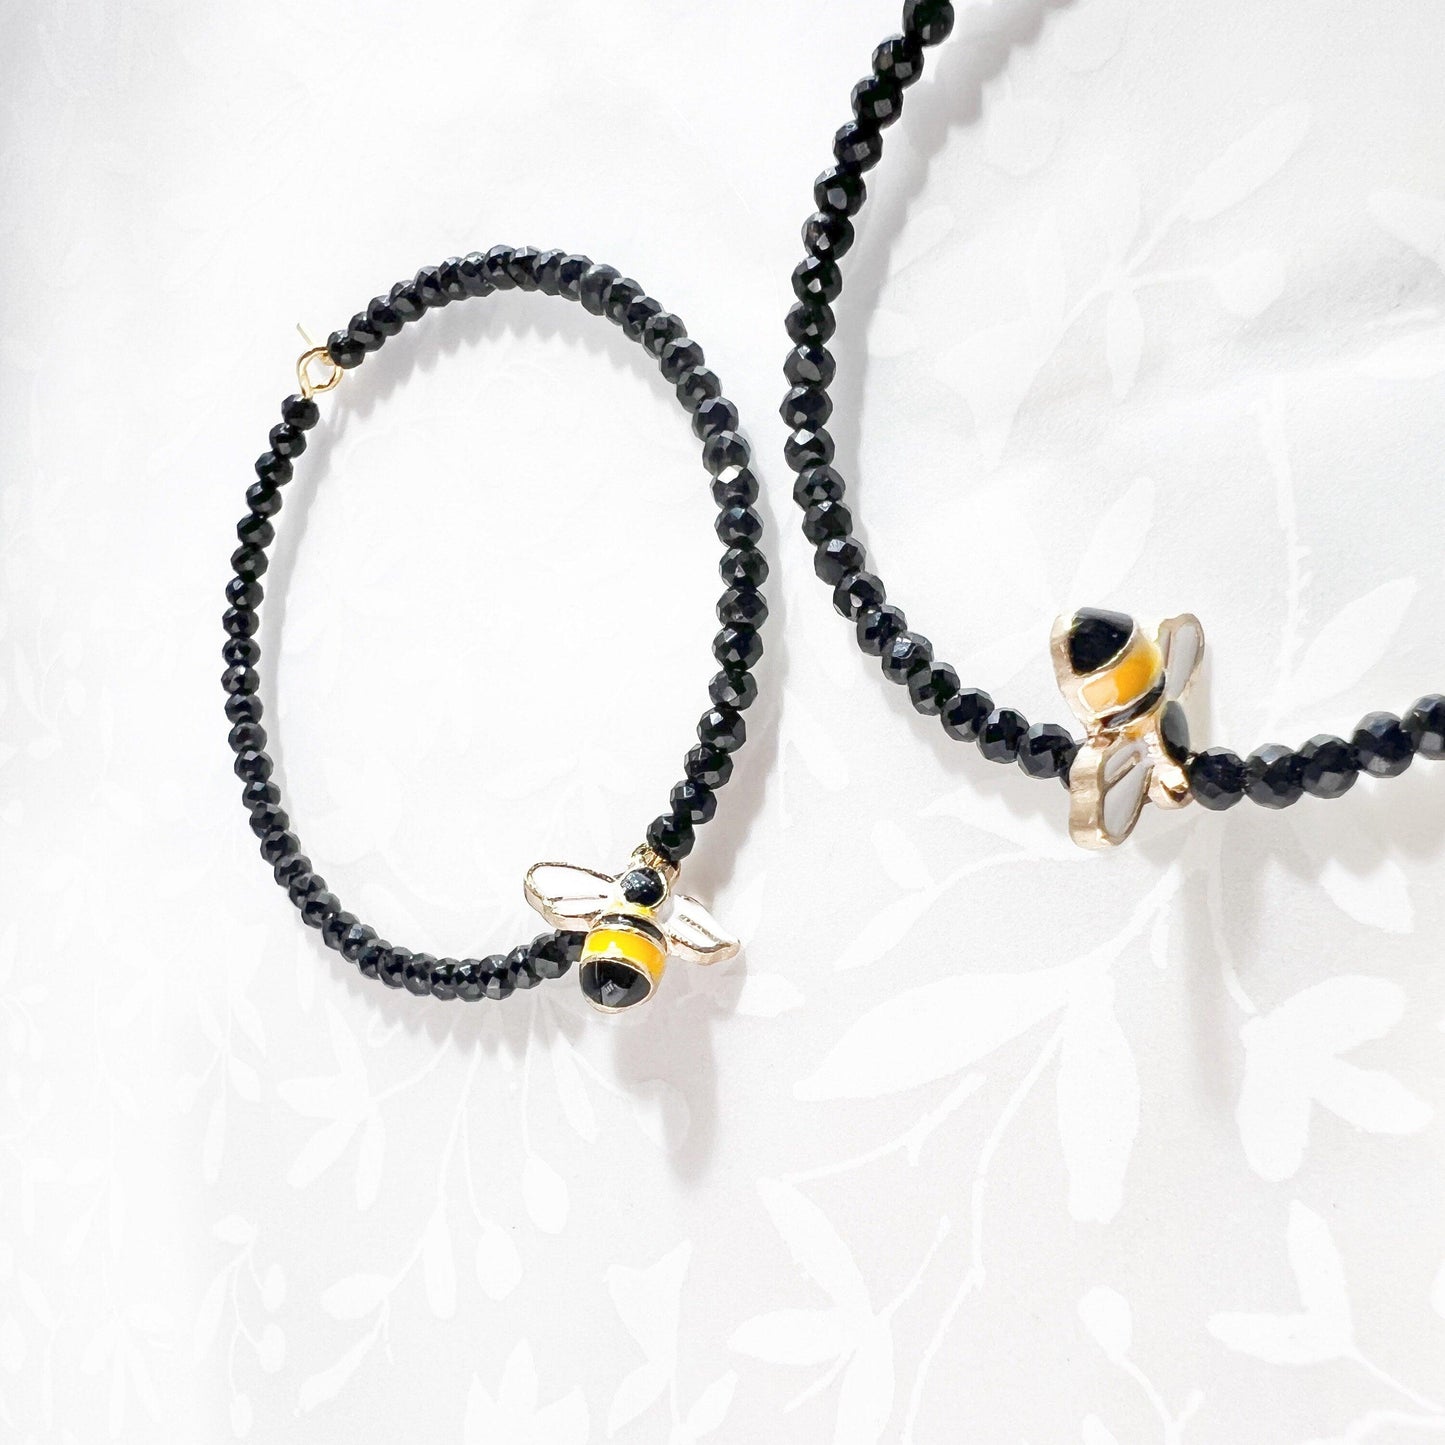 Black bug earrings hoops with tiny glass beads, Fun, playful large hoop jewelry for bumble bee insect lover. Lightweith 2 in | 45 mm